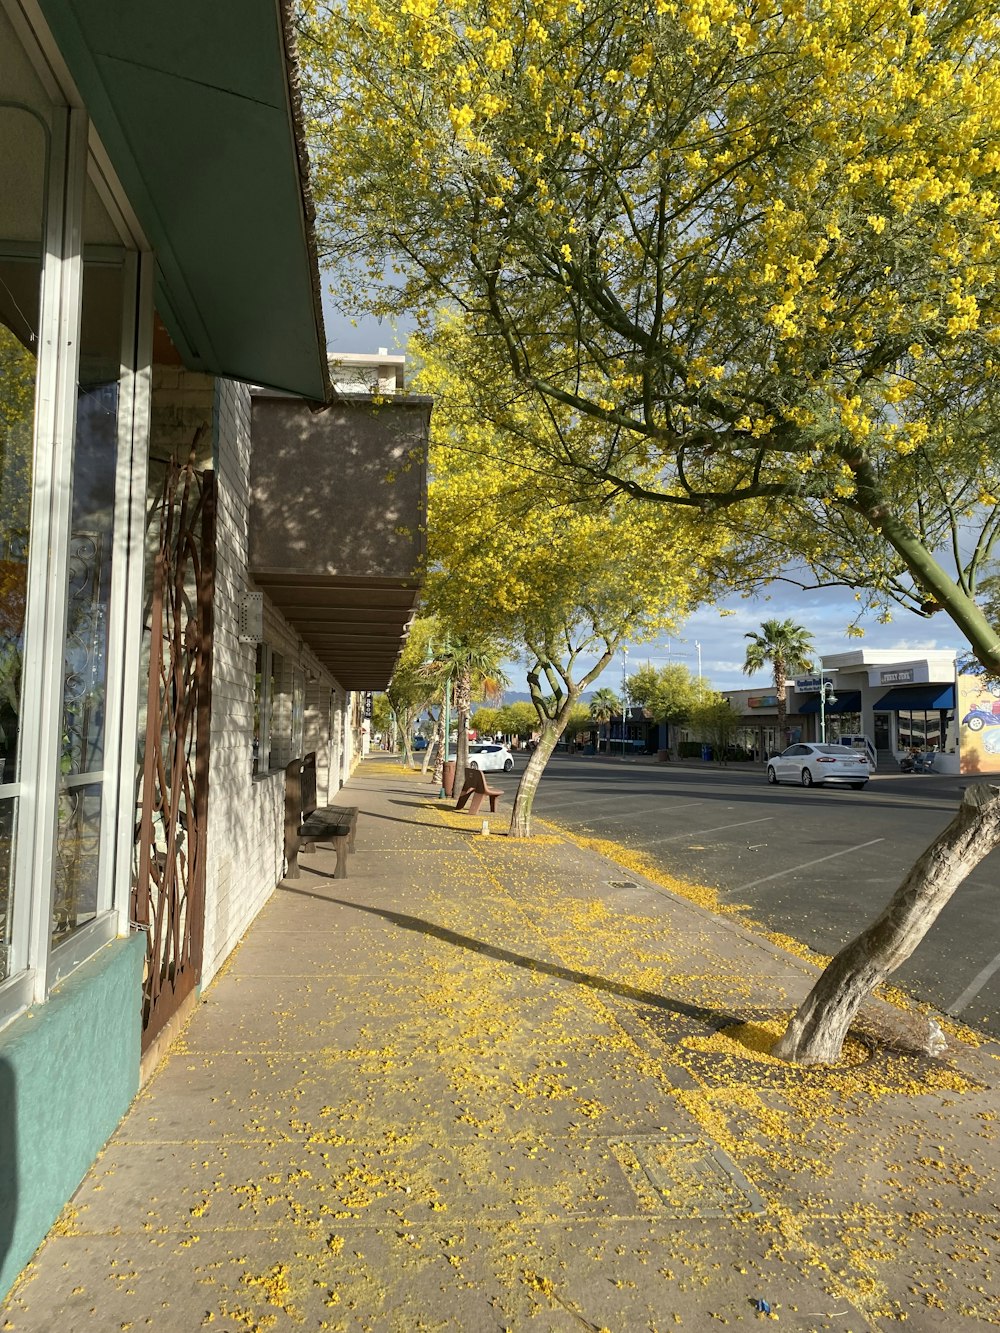 a sidewalk with yellow leaves on the ground